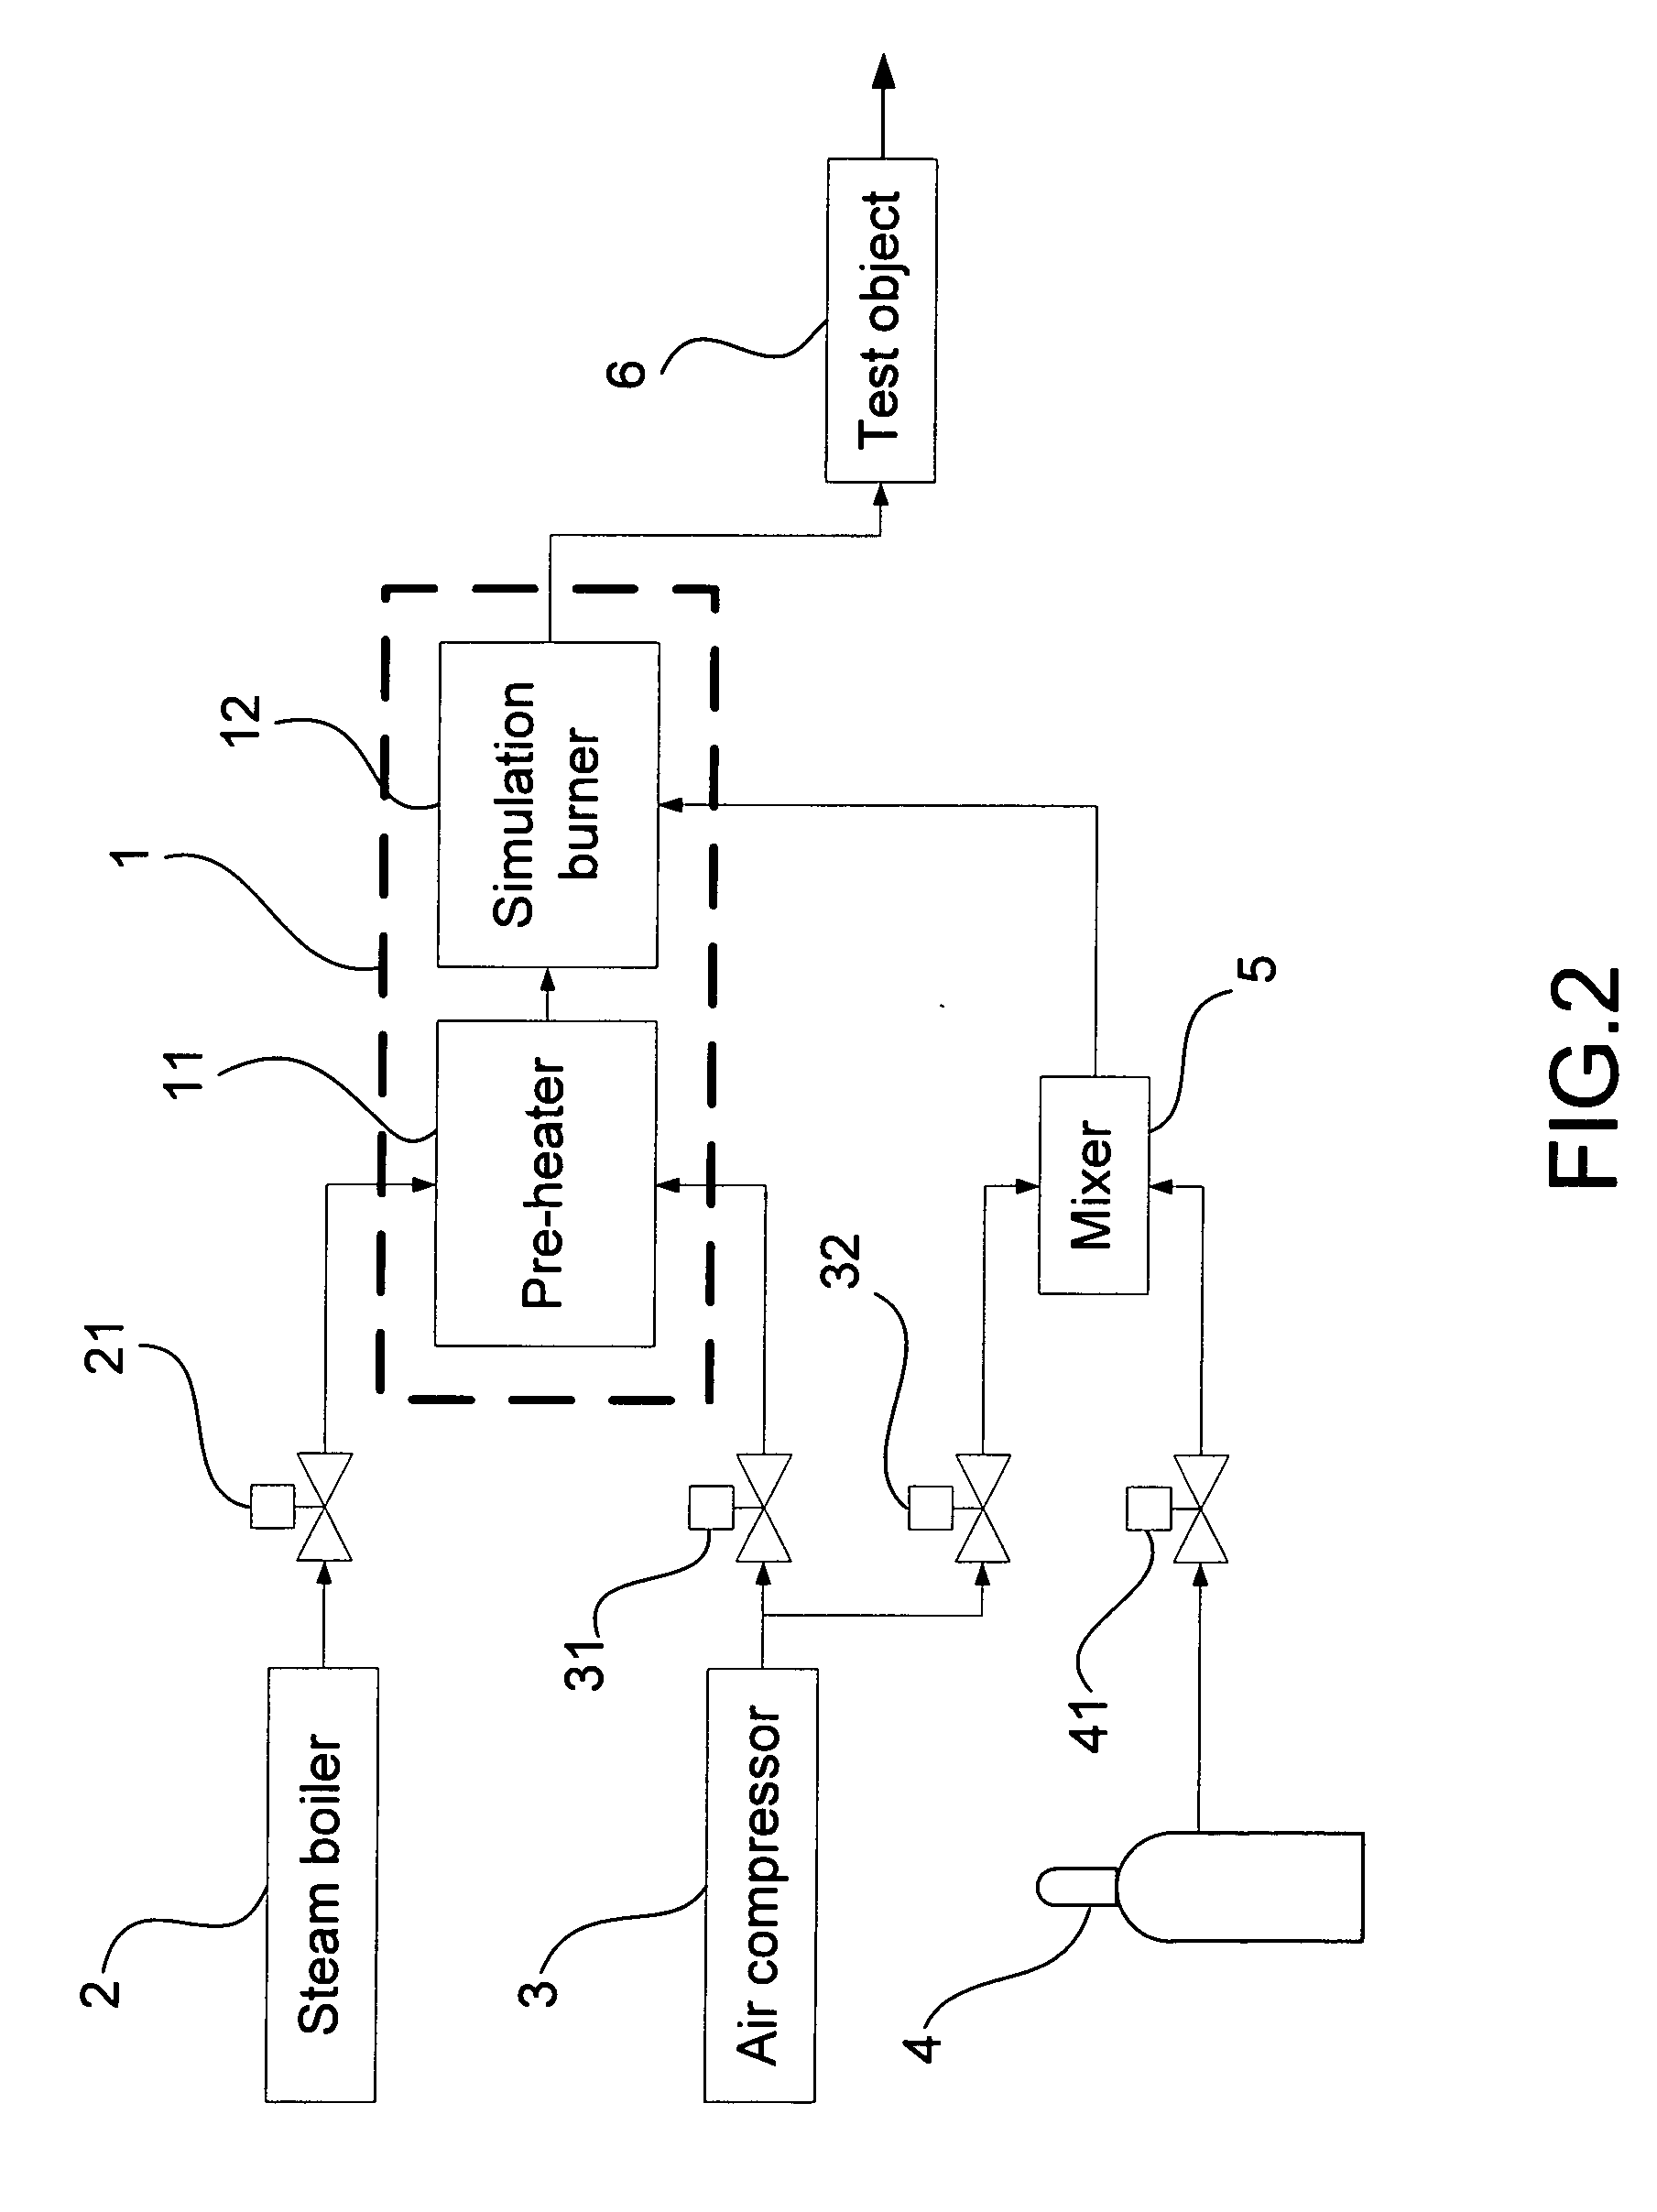 Apparatus for thermal simulation of fuel cell